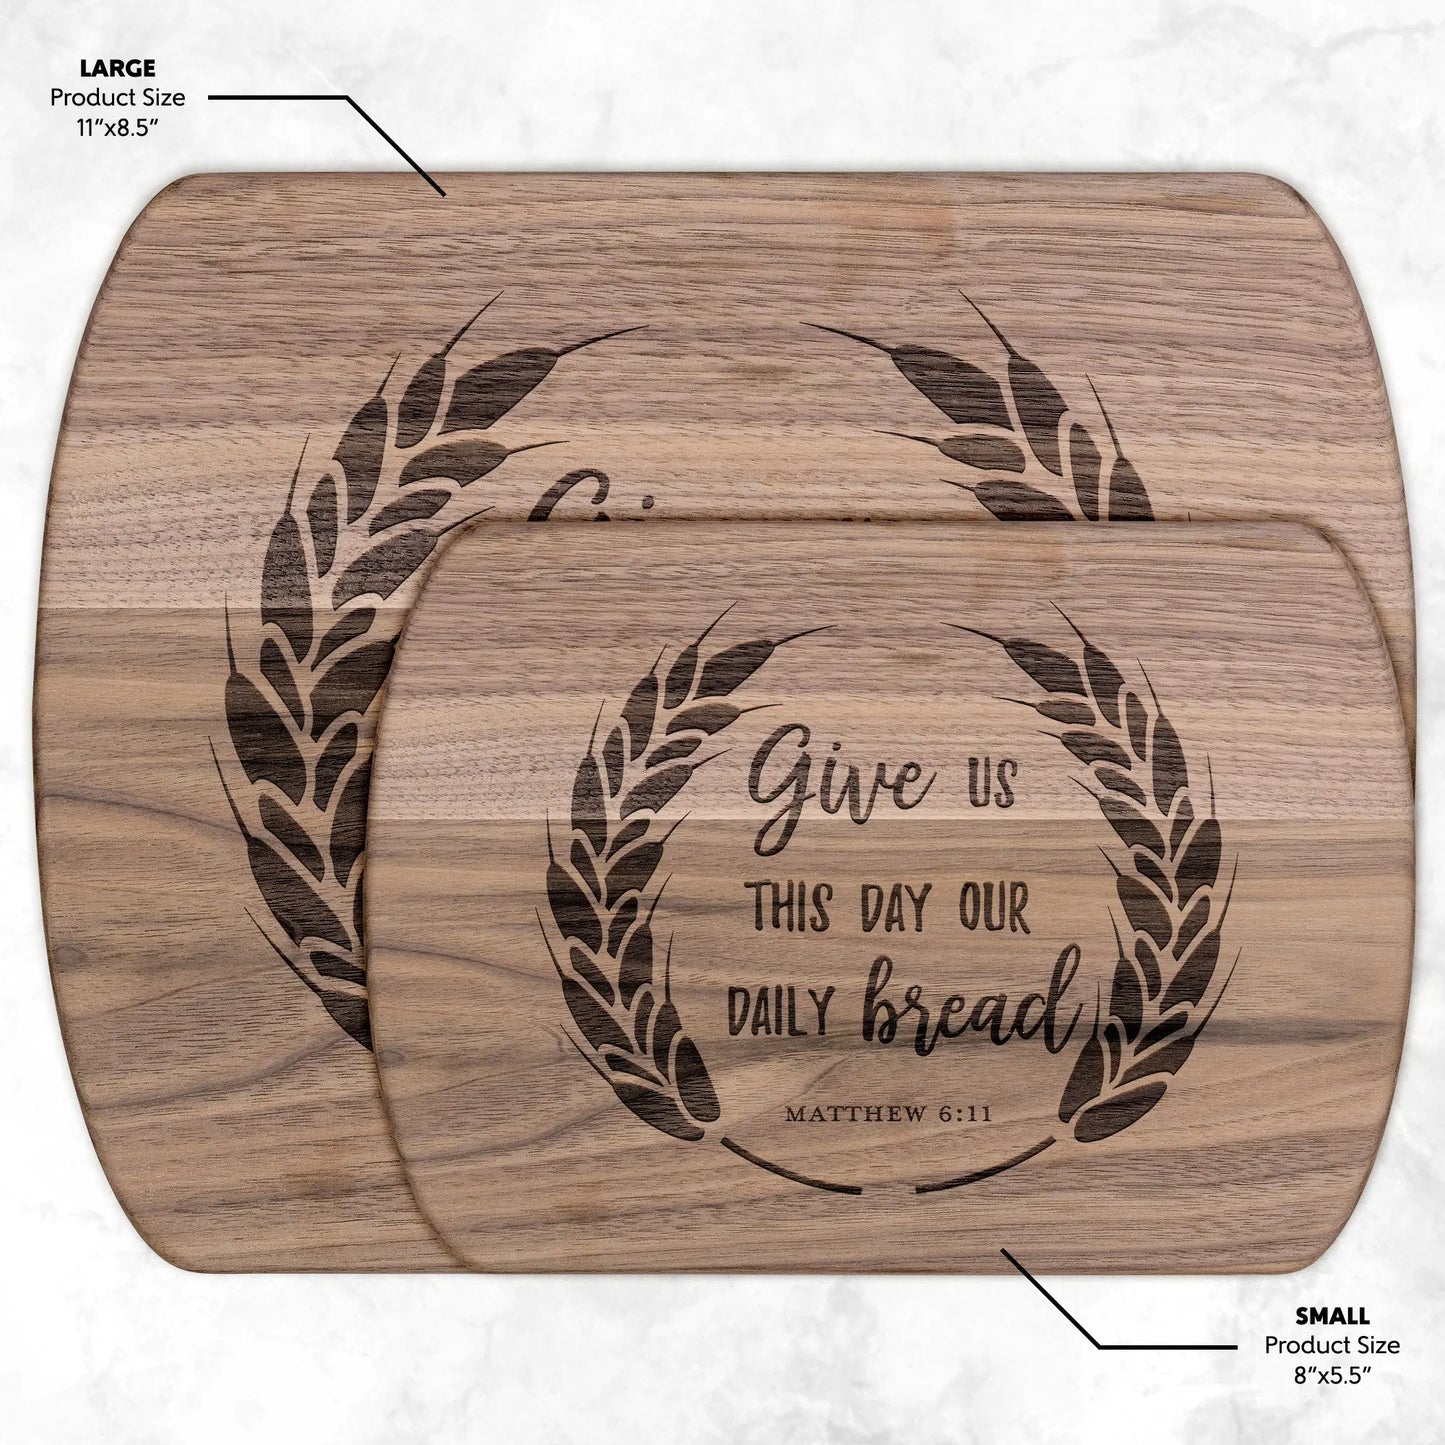 Give Us This Day Our Daily Bread Wood Cutting Board, Wedding Gift, Bridal Shower Gift, Christian Faith Gift, Unique Gift teelaunch